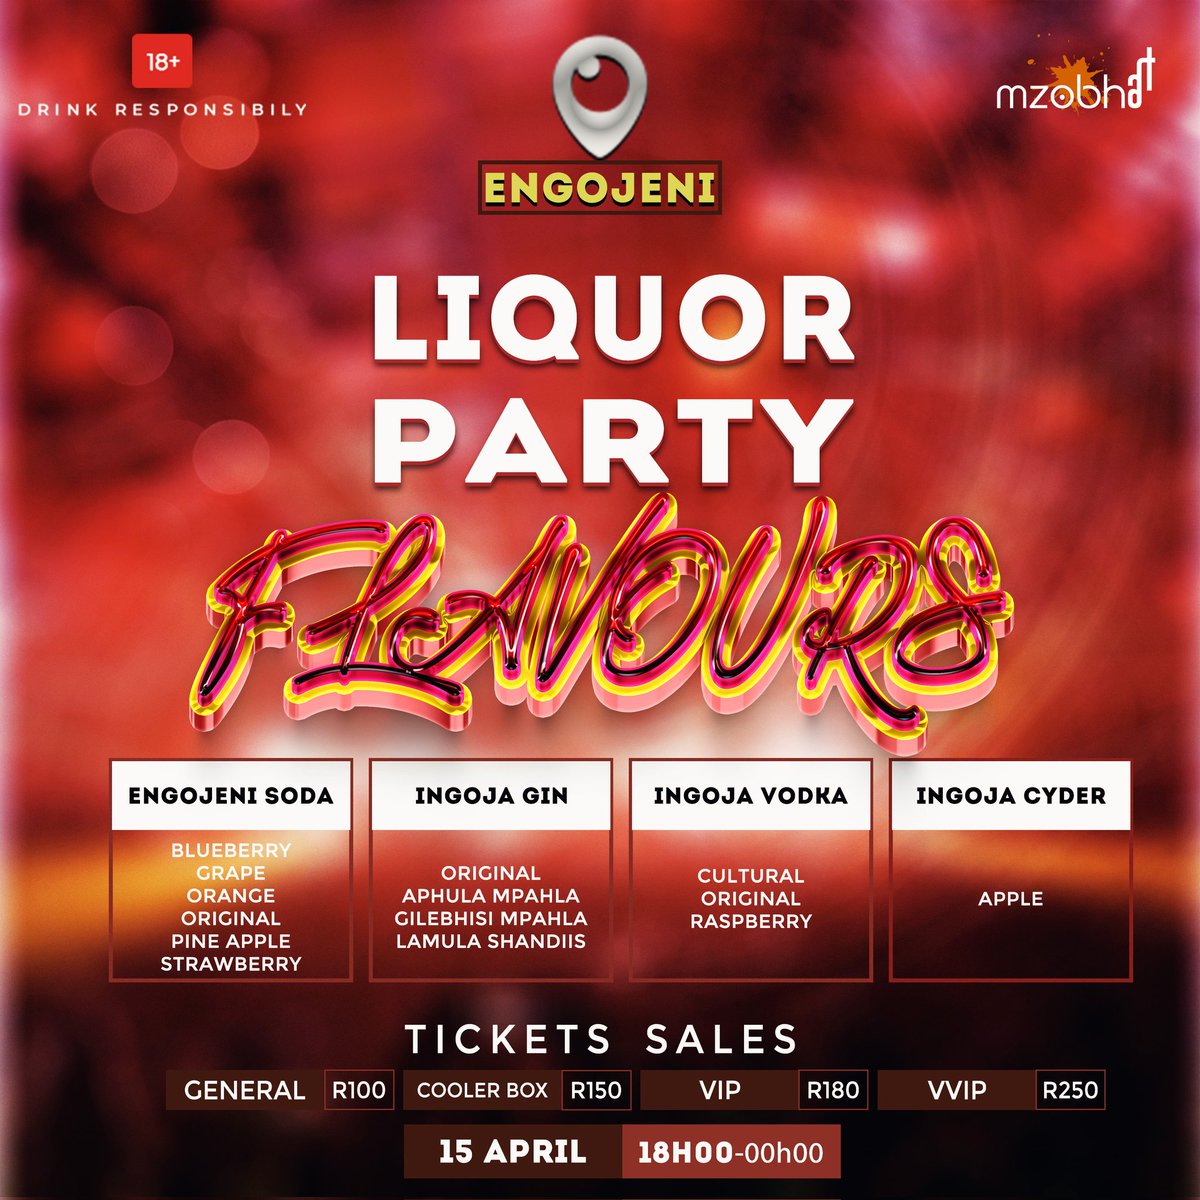 Liquor Party😂😂
First of it kind

NB: ⚠️IT'S A FICTION⚠️
-Enquire for your own event poster✍🏾 at #MzobhART 

#gntm #DrNandiphaMagudumana #TearsoftheKingdom #ZeldaTearsOfTheKingdom #DMK_Files #BOYSPLANET #MUFC #QueenRadio #aespa_is_back #BreakingNews #GraphicDesign #follow #art